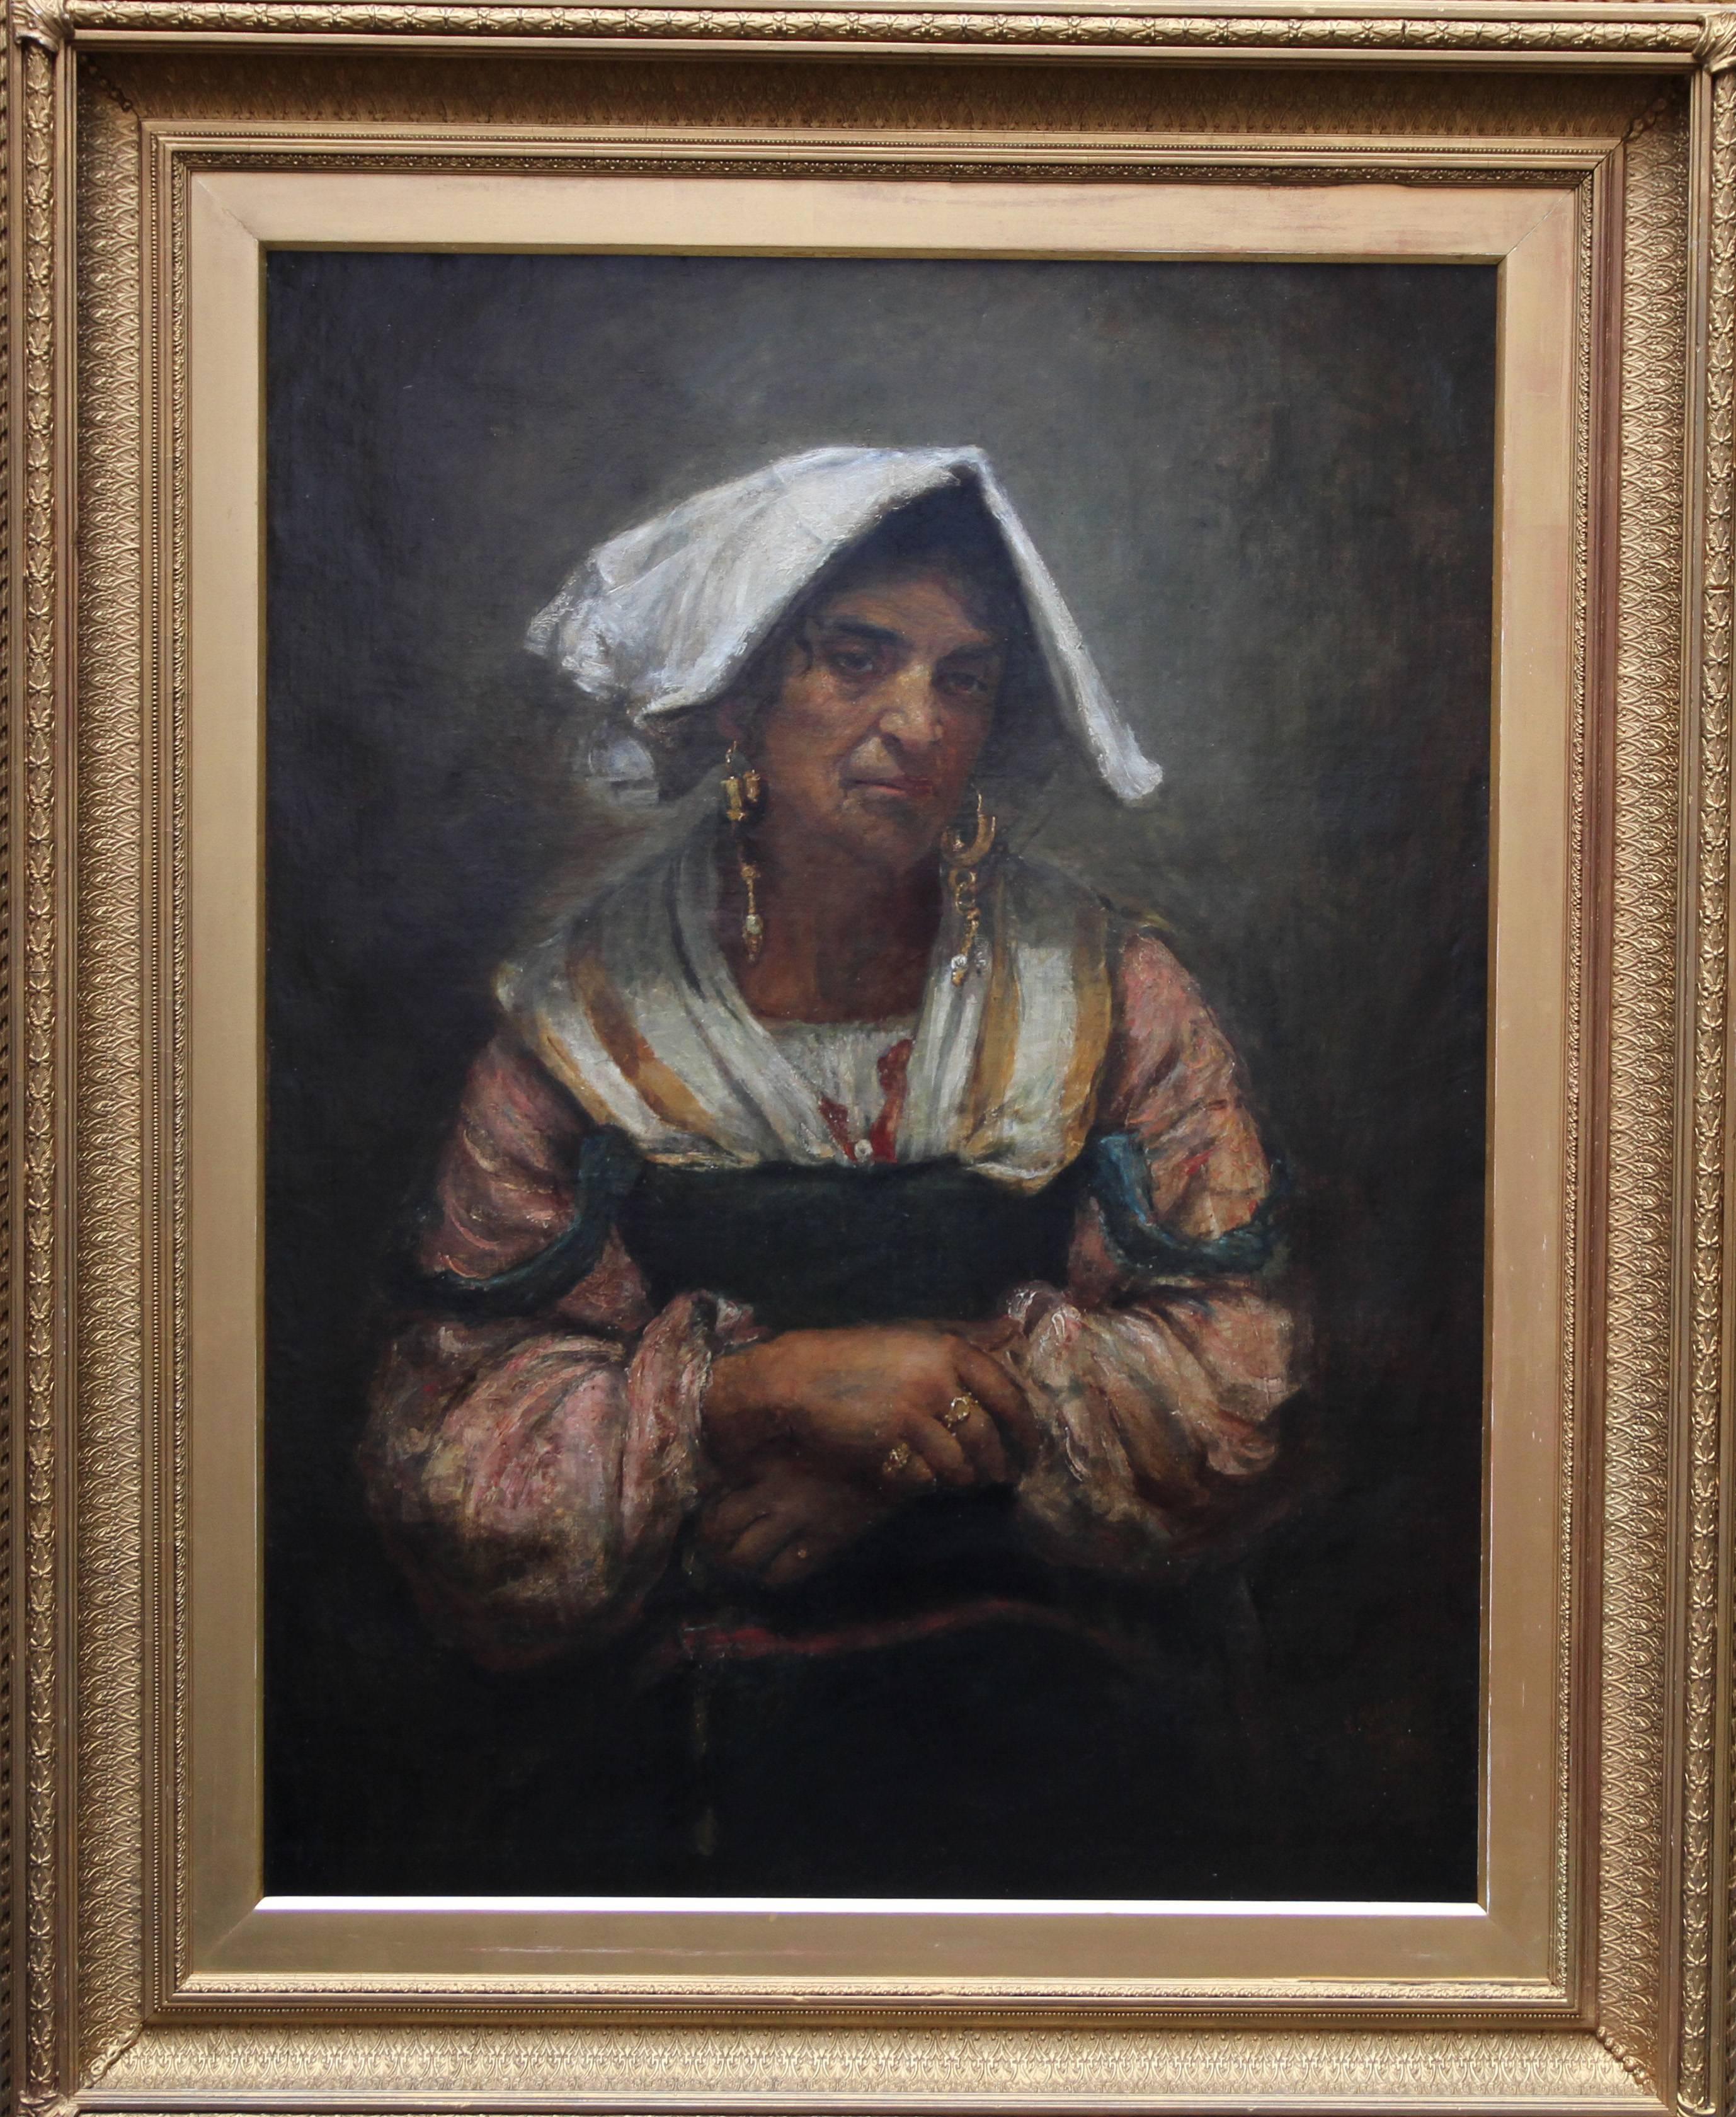 Roma Lady Jebsa - Victorian oil portrait exhibited Manchester Art Gallery 2018